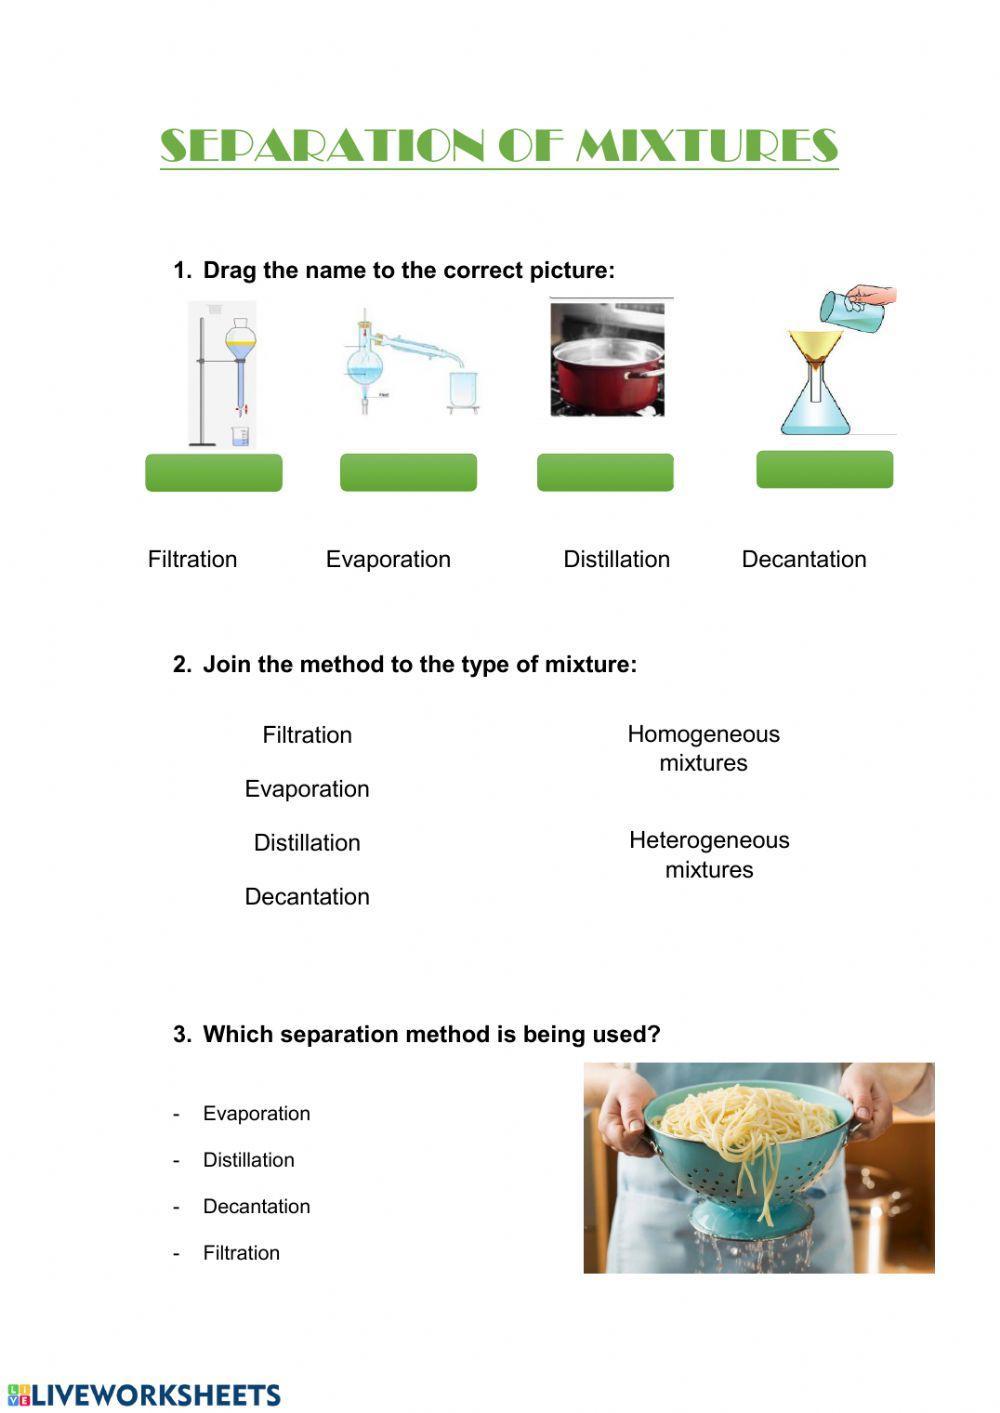 Separation of mixtures